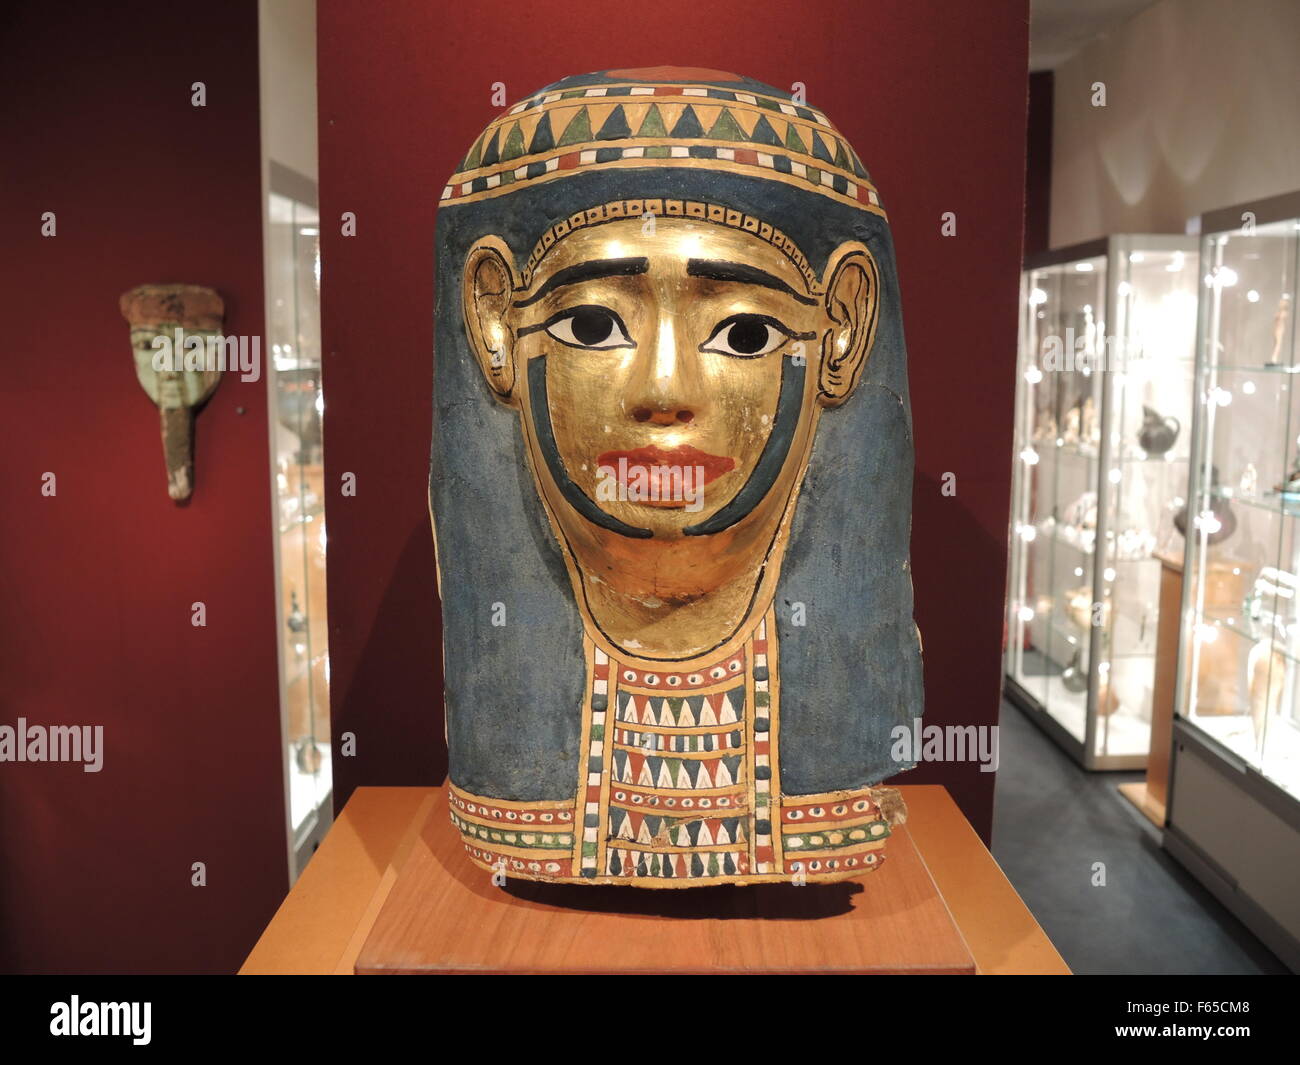 Basel, Switzerland. 12th Nov, 2015. An Egyptian mummy mask at the art and antiquities fair in Basel, Switzerland, 12 November 2015. The price of the golden mask from the Ptolemy dynasty - around 1 to 2 centuries before Christ - is estimated at 75,000 euros and offered by the Amsterdam-based gallery Archea. Photo: THOMAS BURMEISTER/dpa/Alamy Live News Stock Photo